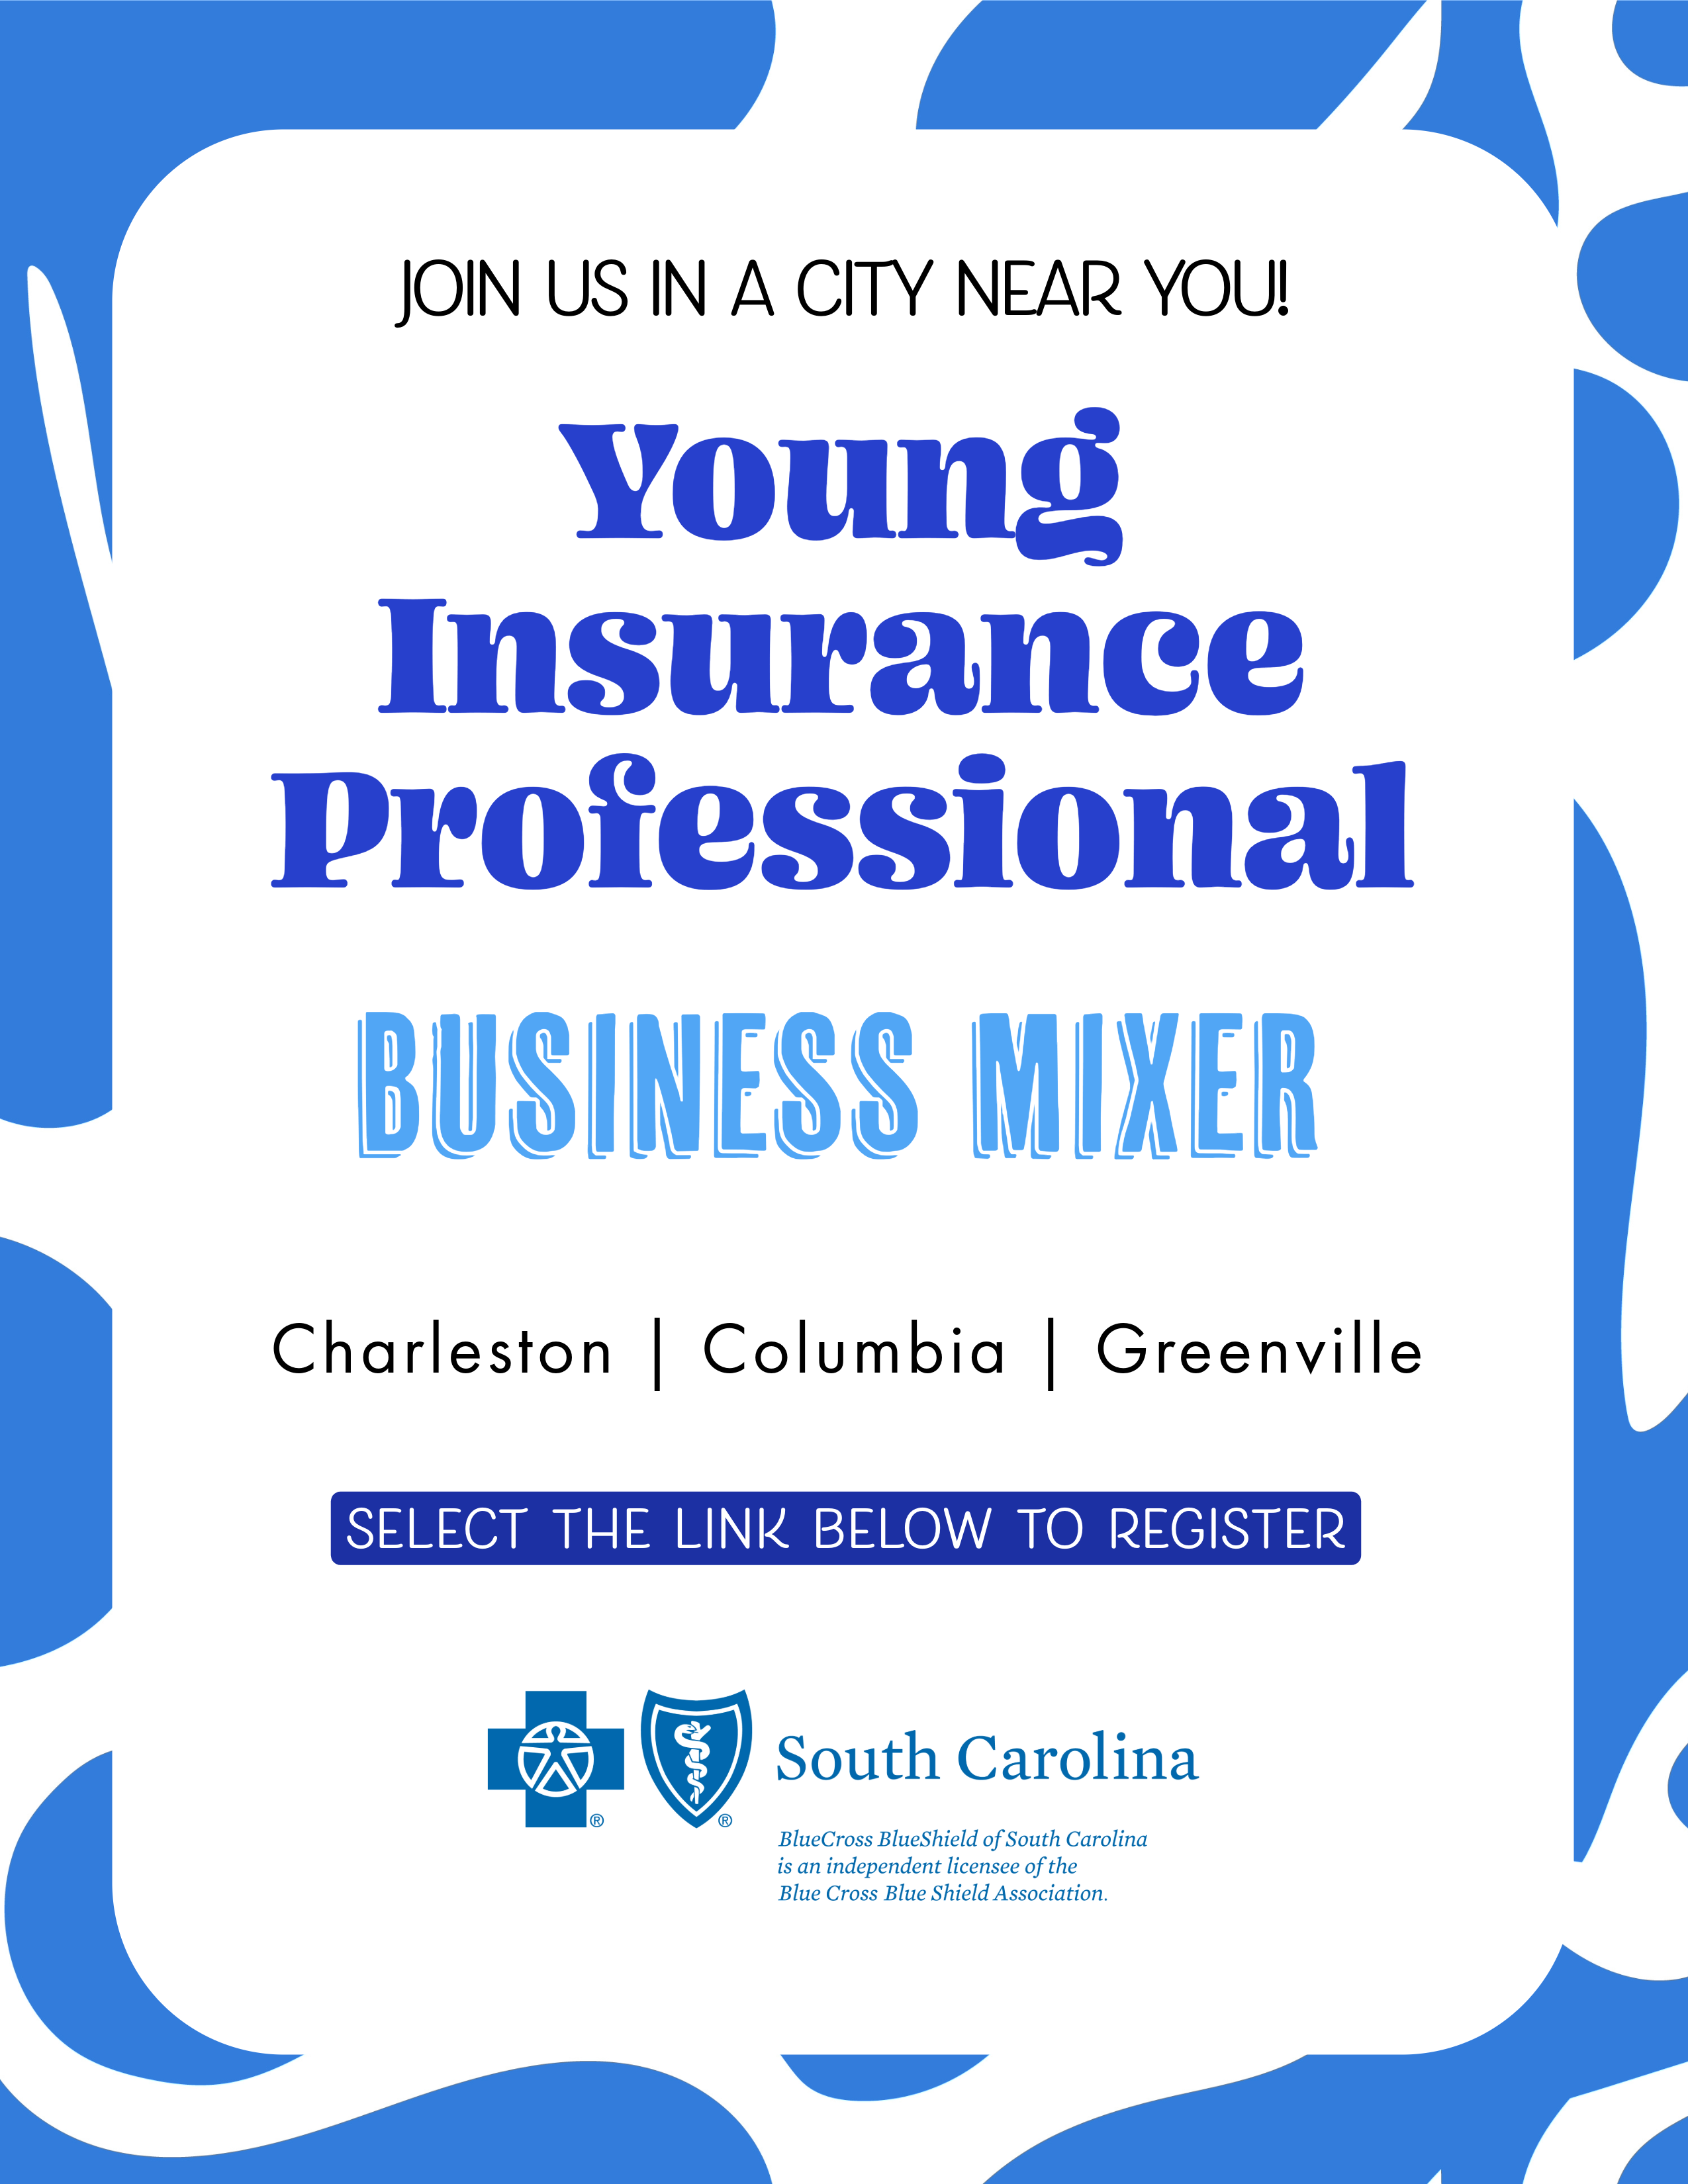 Young Insurance Professional Business Mixer Flyer